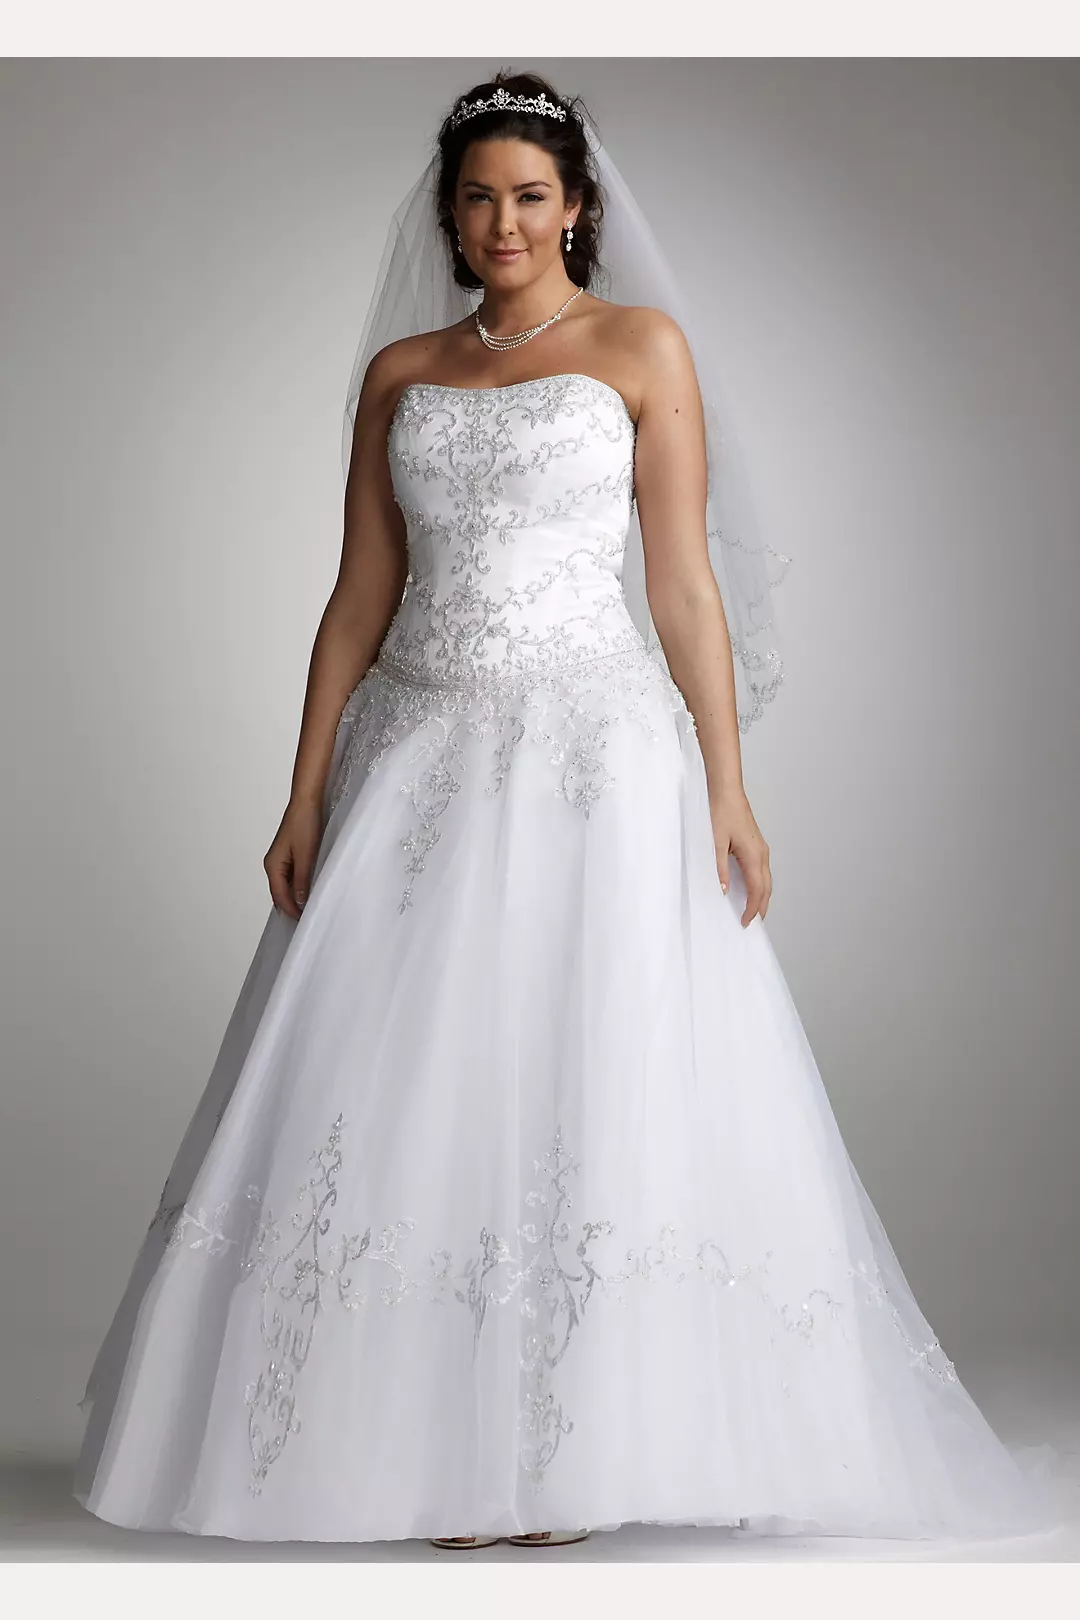 Extra Length Tulle Ball Gown with Satin Bodice Image